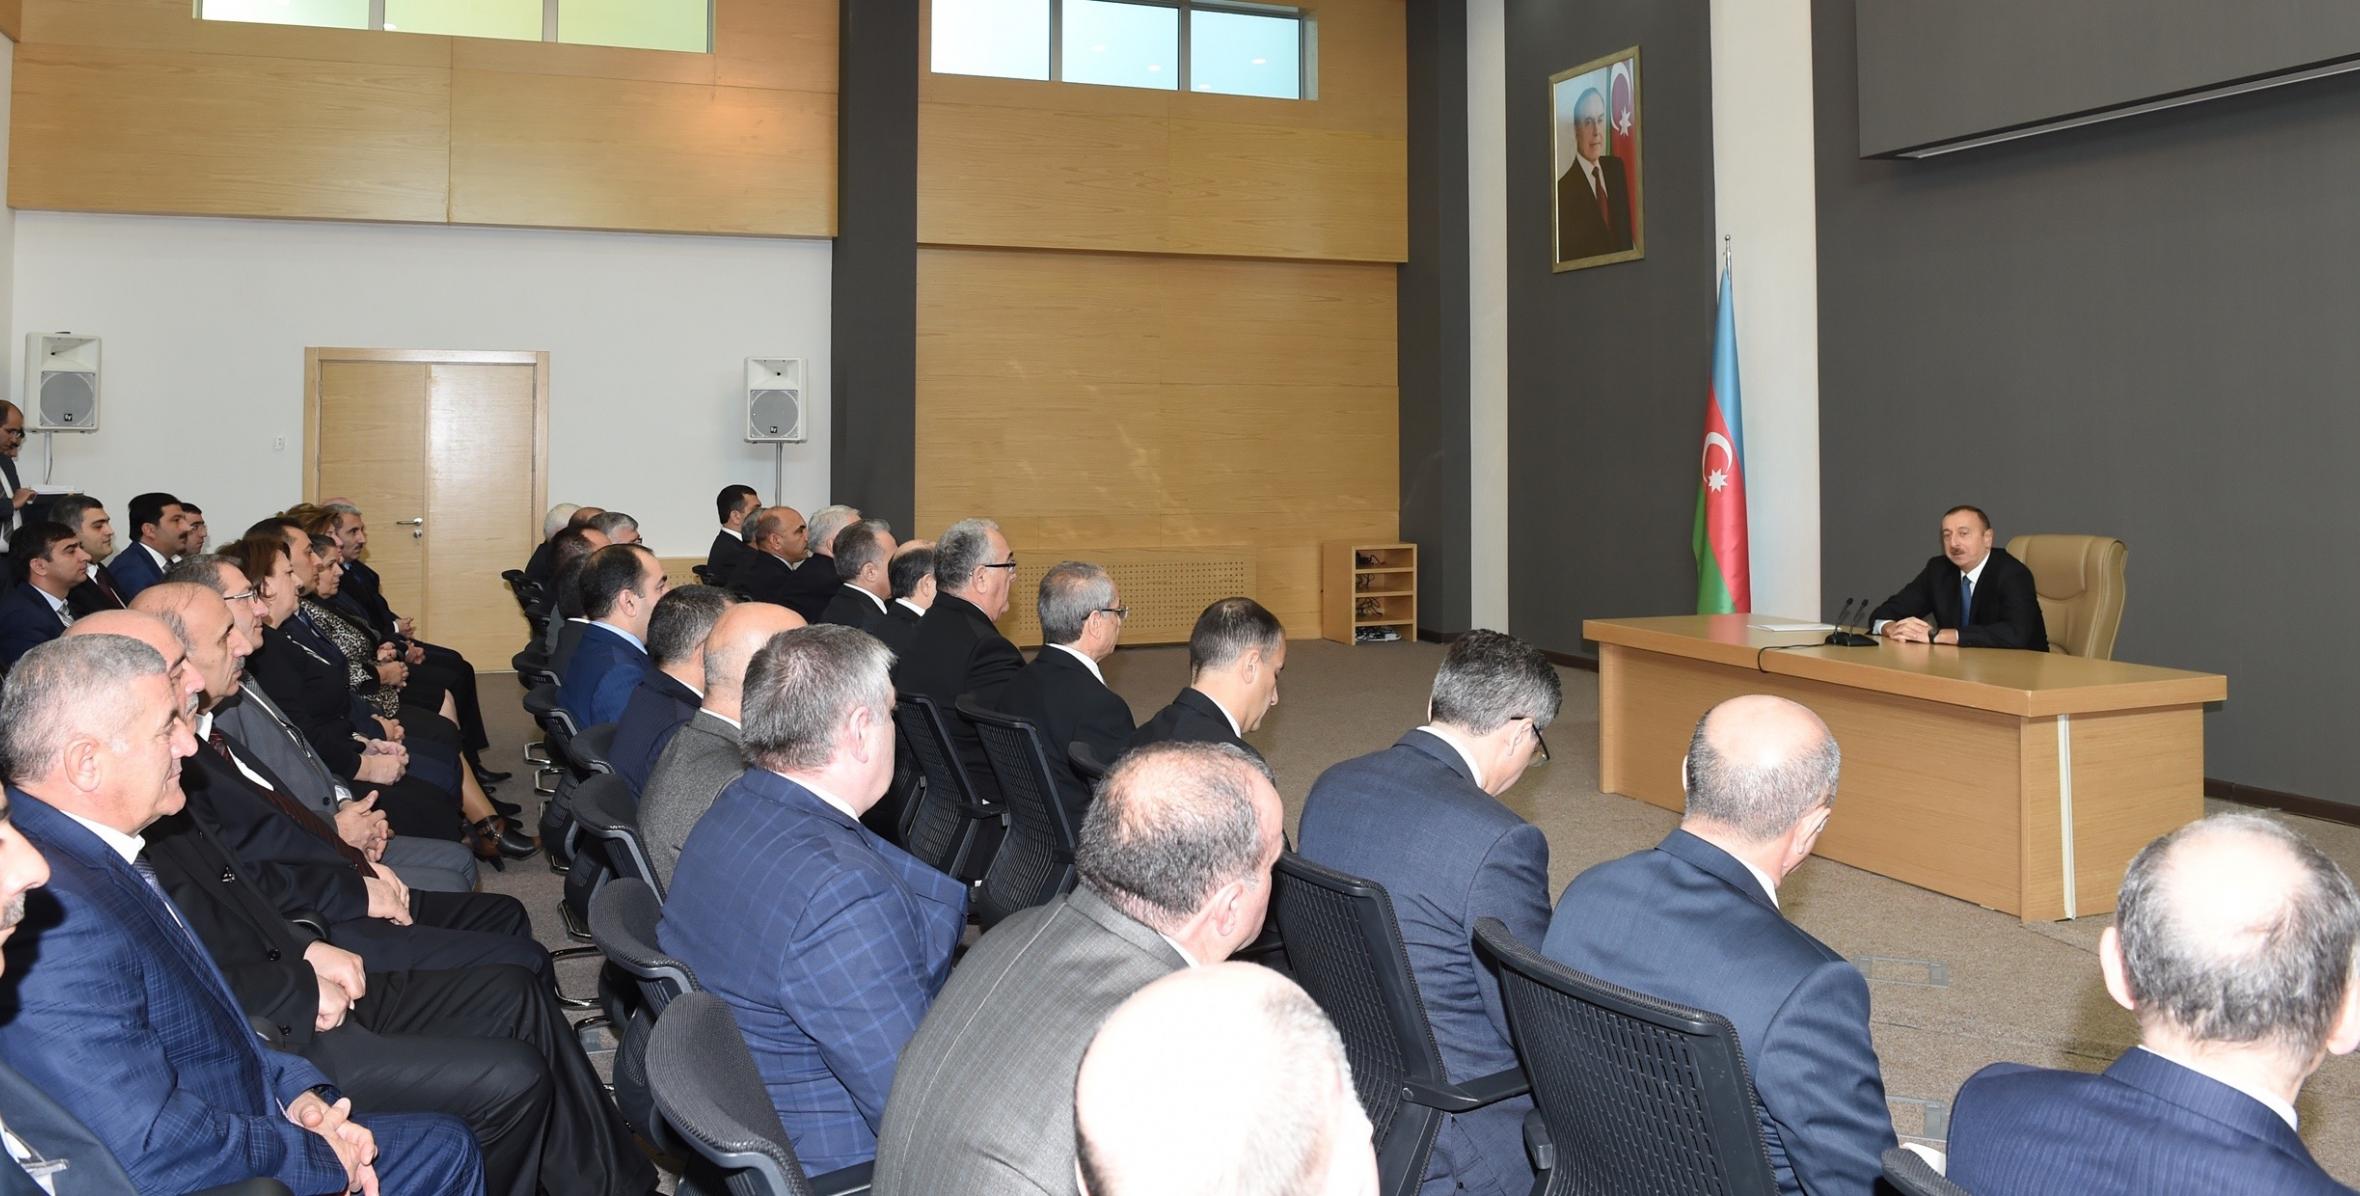 Ilham Aliyev attended the opening of a new administrative building of the Shaki Court Complex